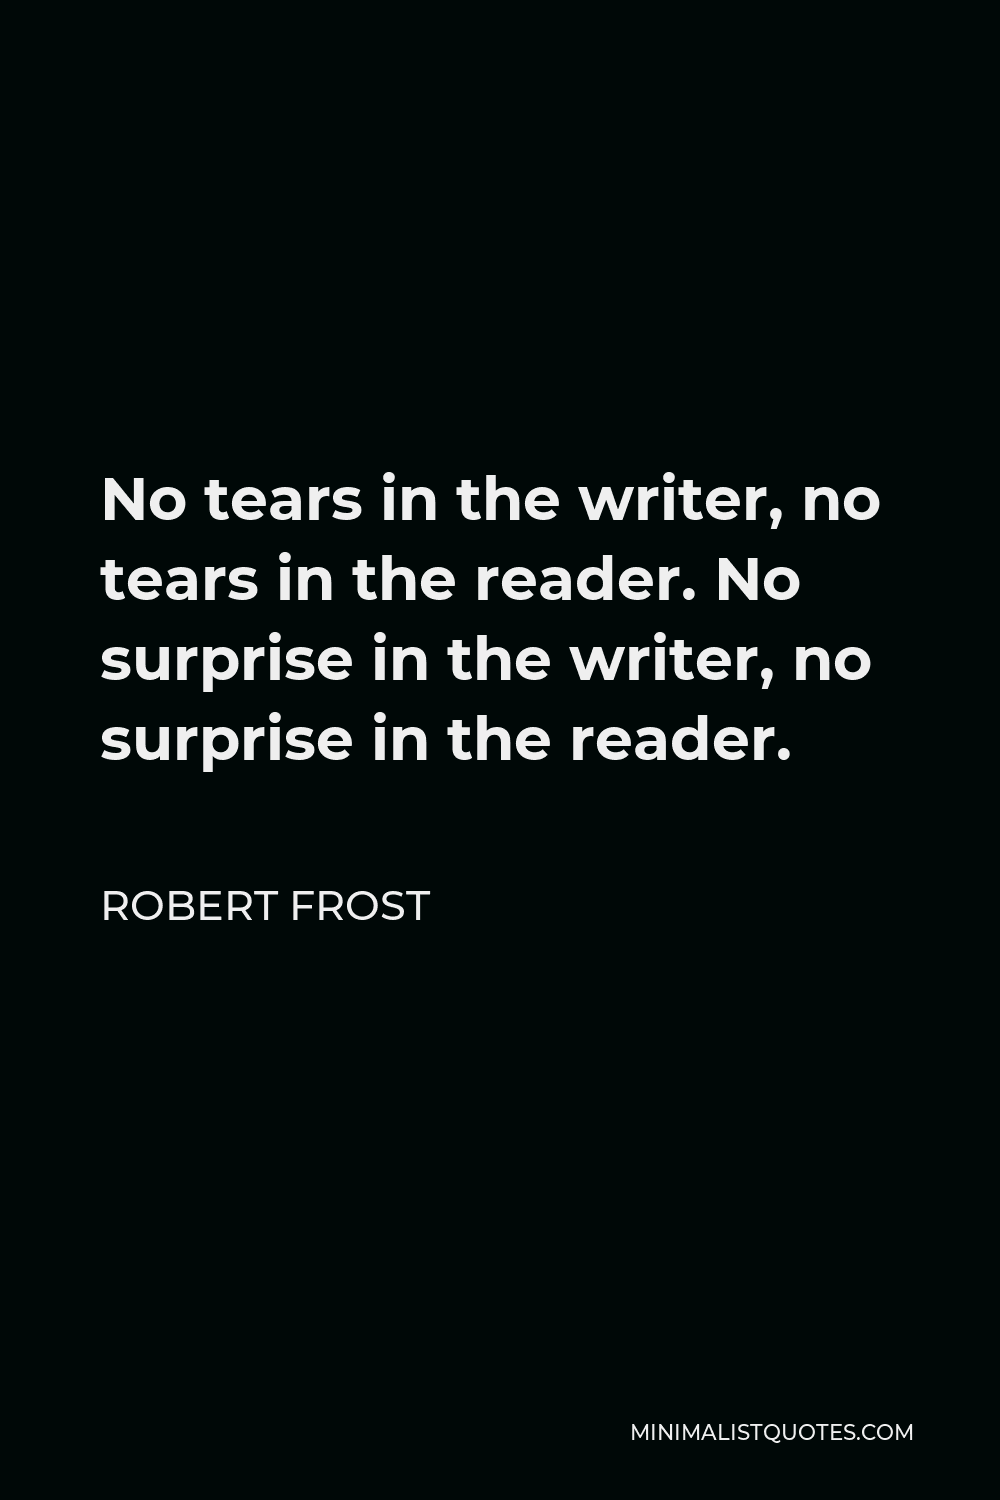 Robert Frost Quote - No tears in the writer, no tears in the reader. No surprise in the writer, no surprise in the reader.